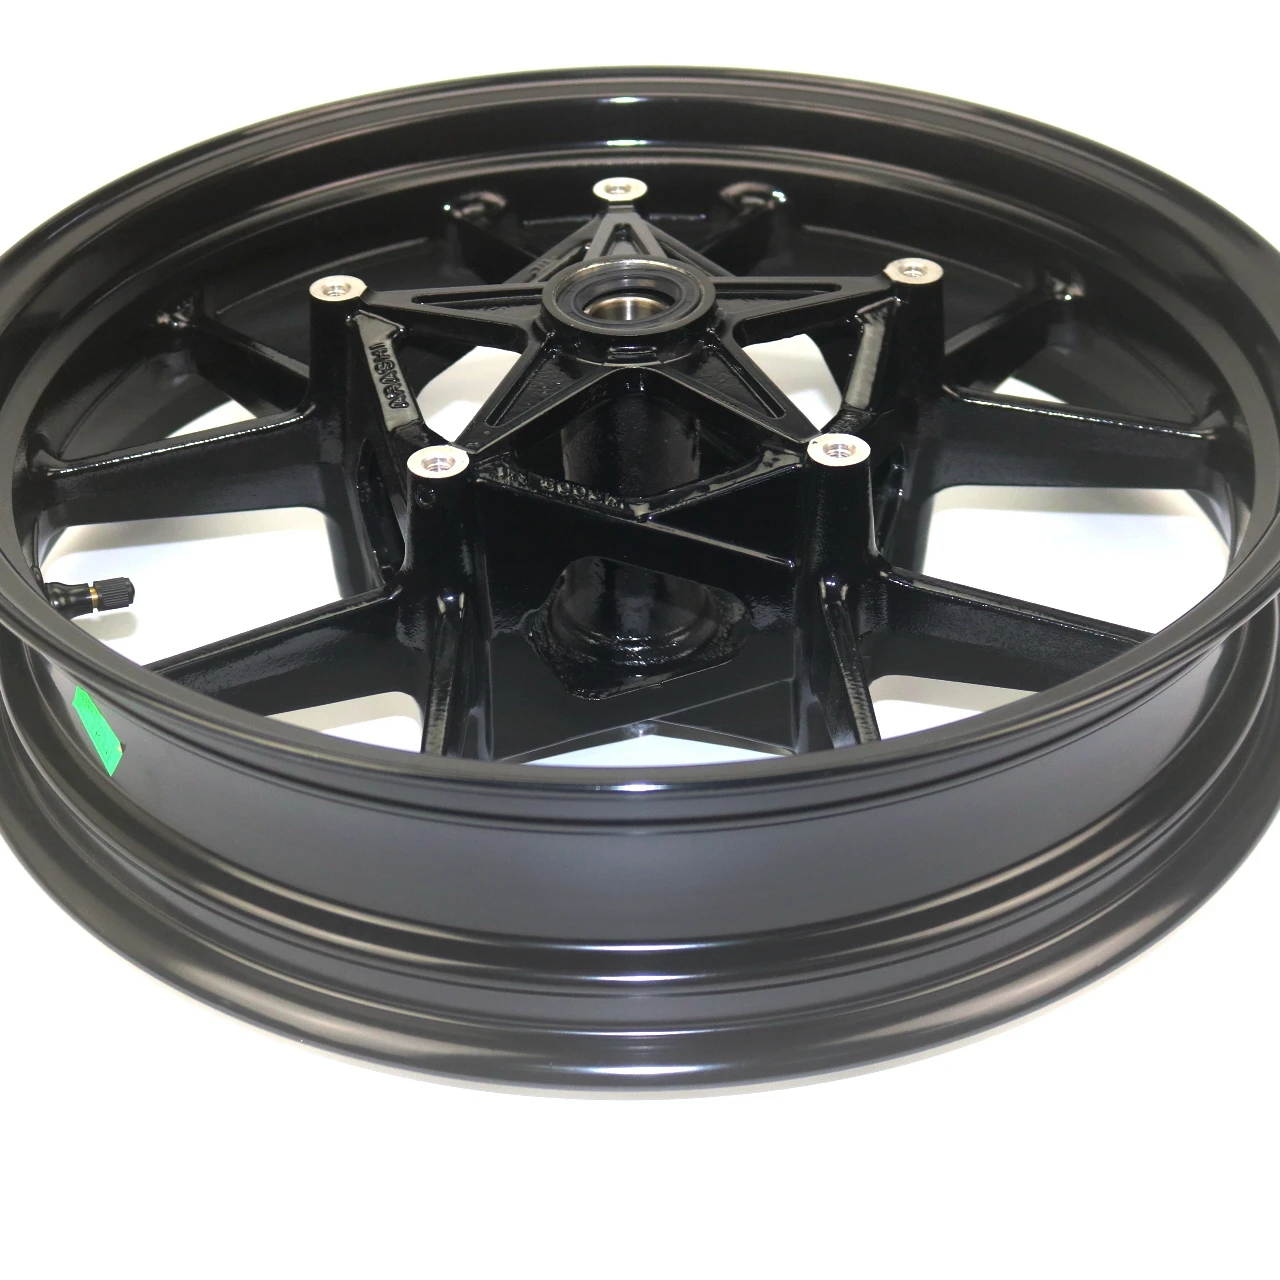 Motorcycle  High quality Wheel Rims For BMW S1000R S1000RR 2010 2011 2012 2013 2014 2015 2016 2017 2018 Wheels Rims